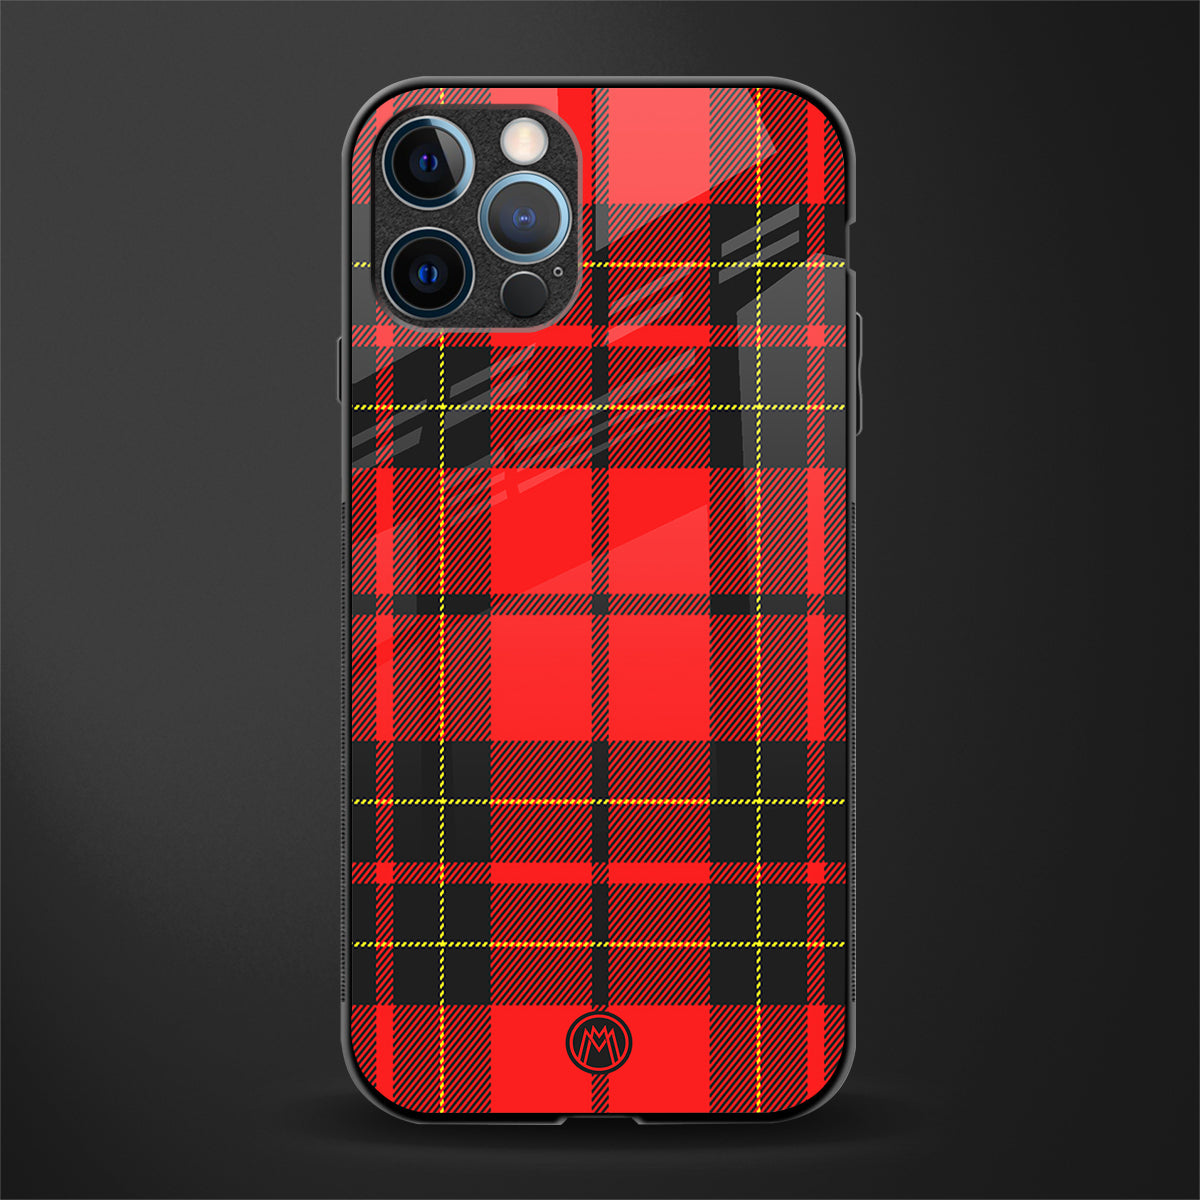 cozy red sweater glass case for iphone 12 pro max image